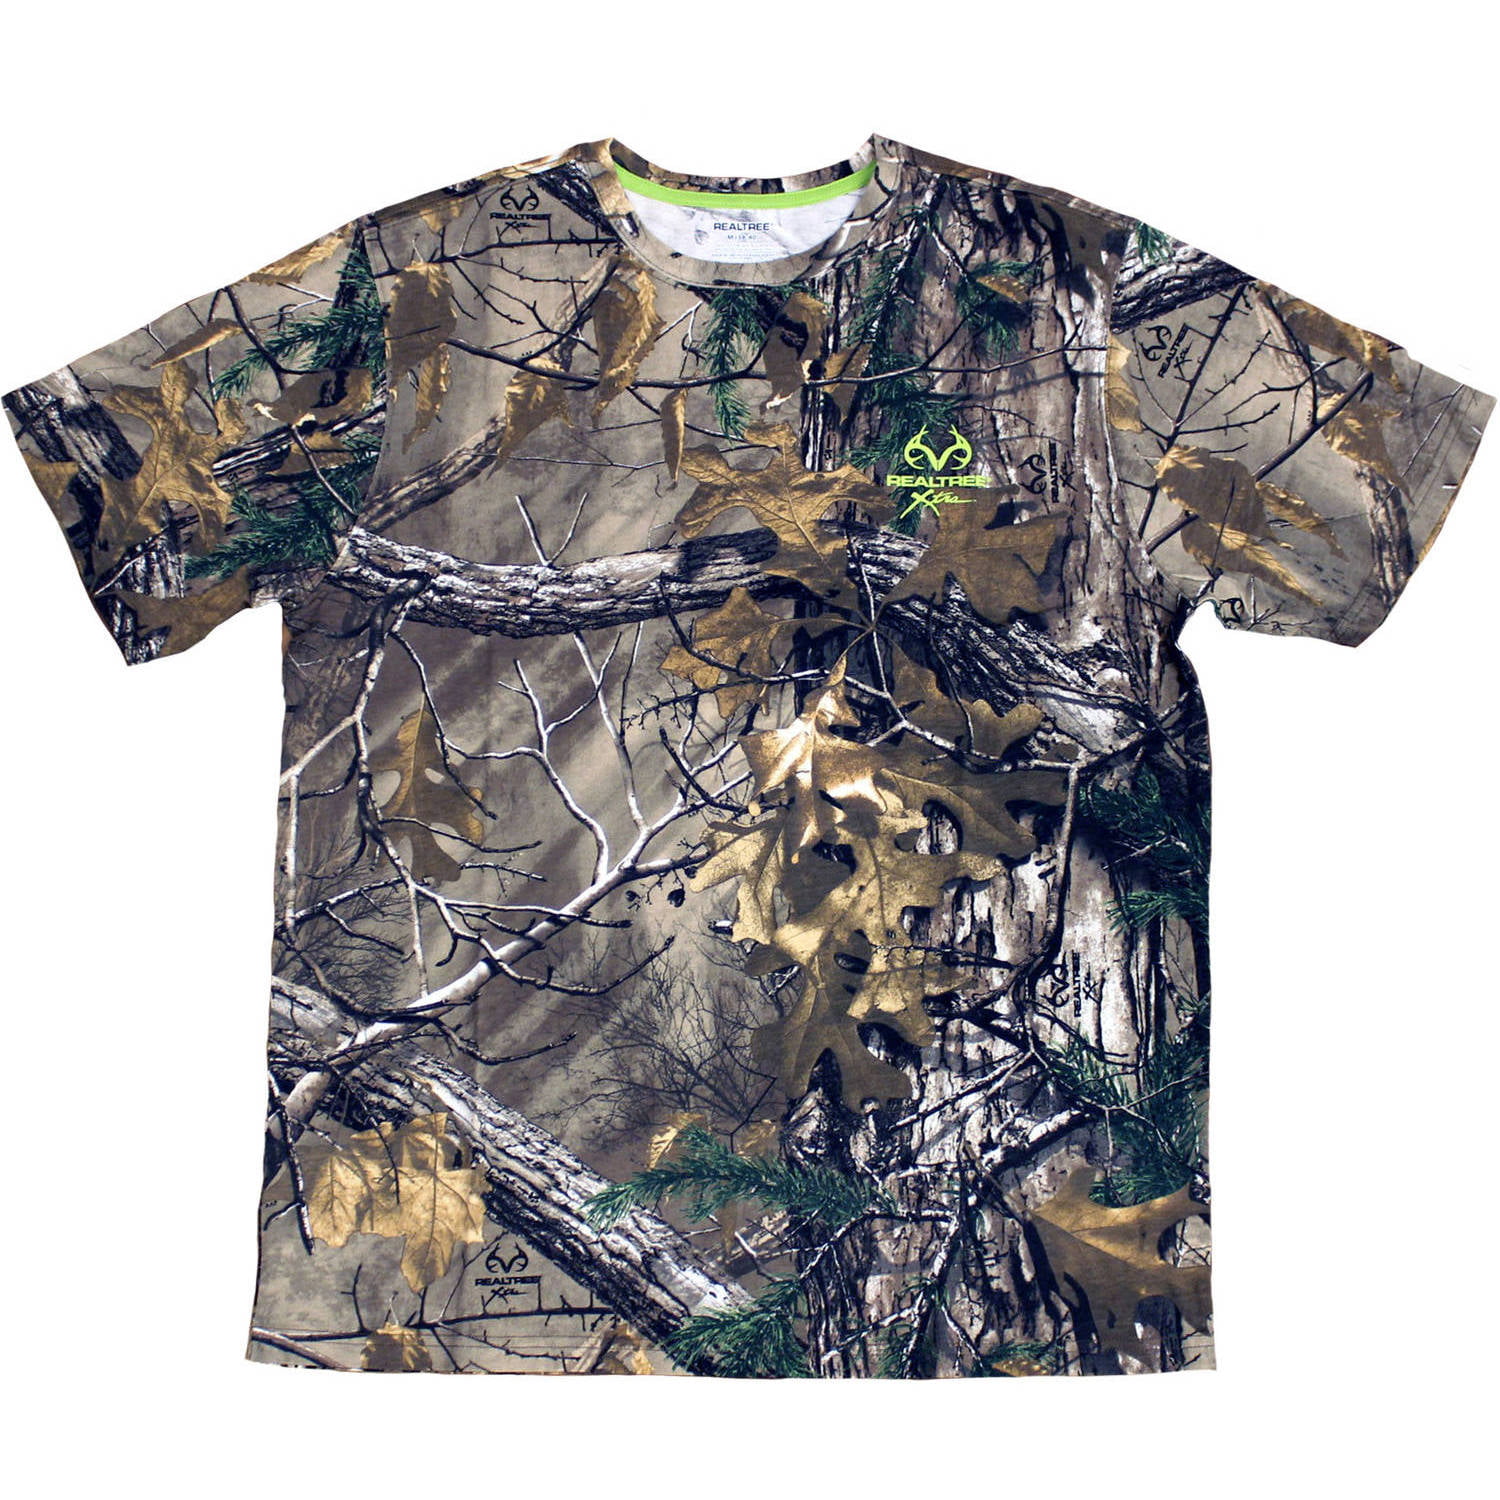 Men's Short Sleeve Camo Tee, Available in Multiple Patterns - Walmart.com